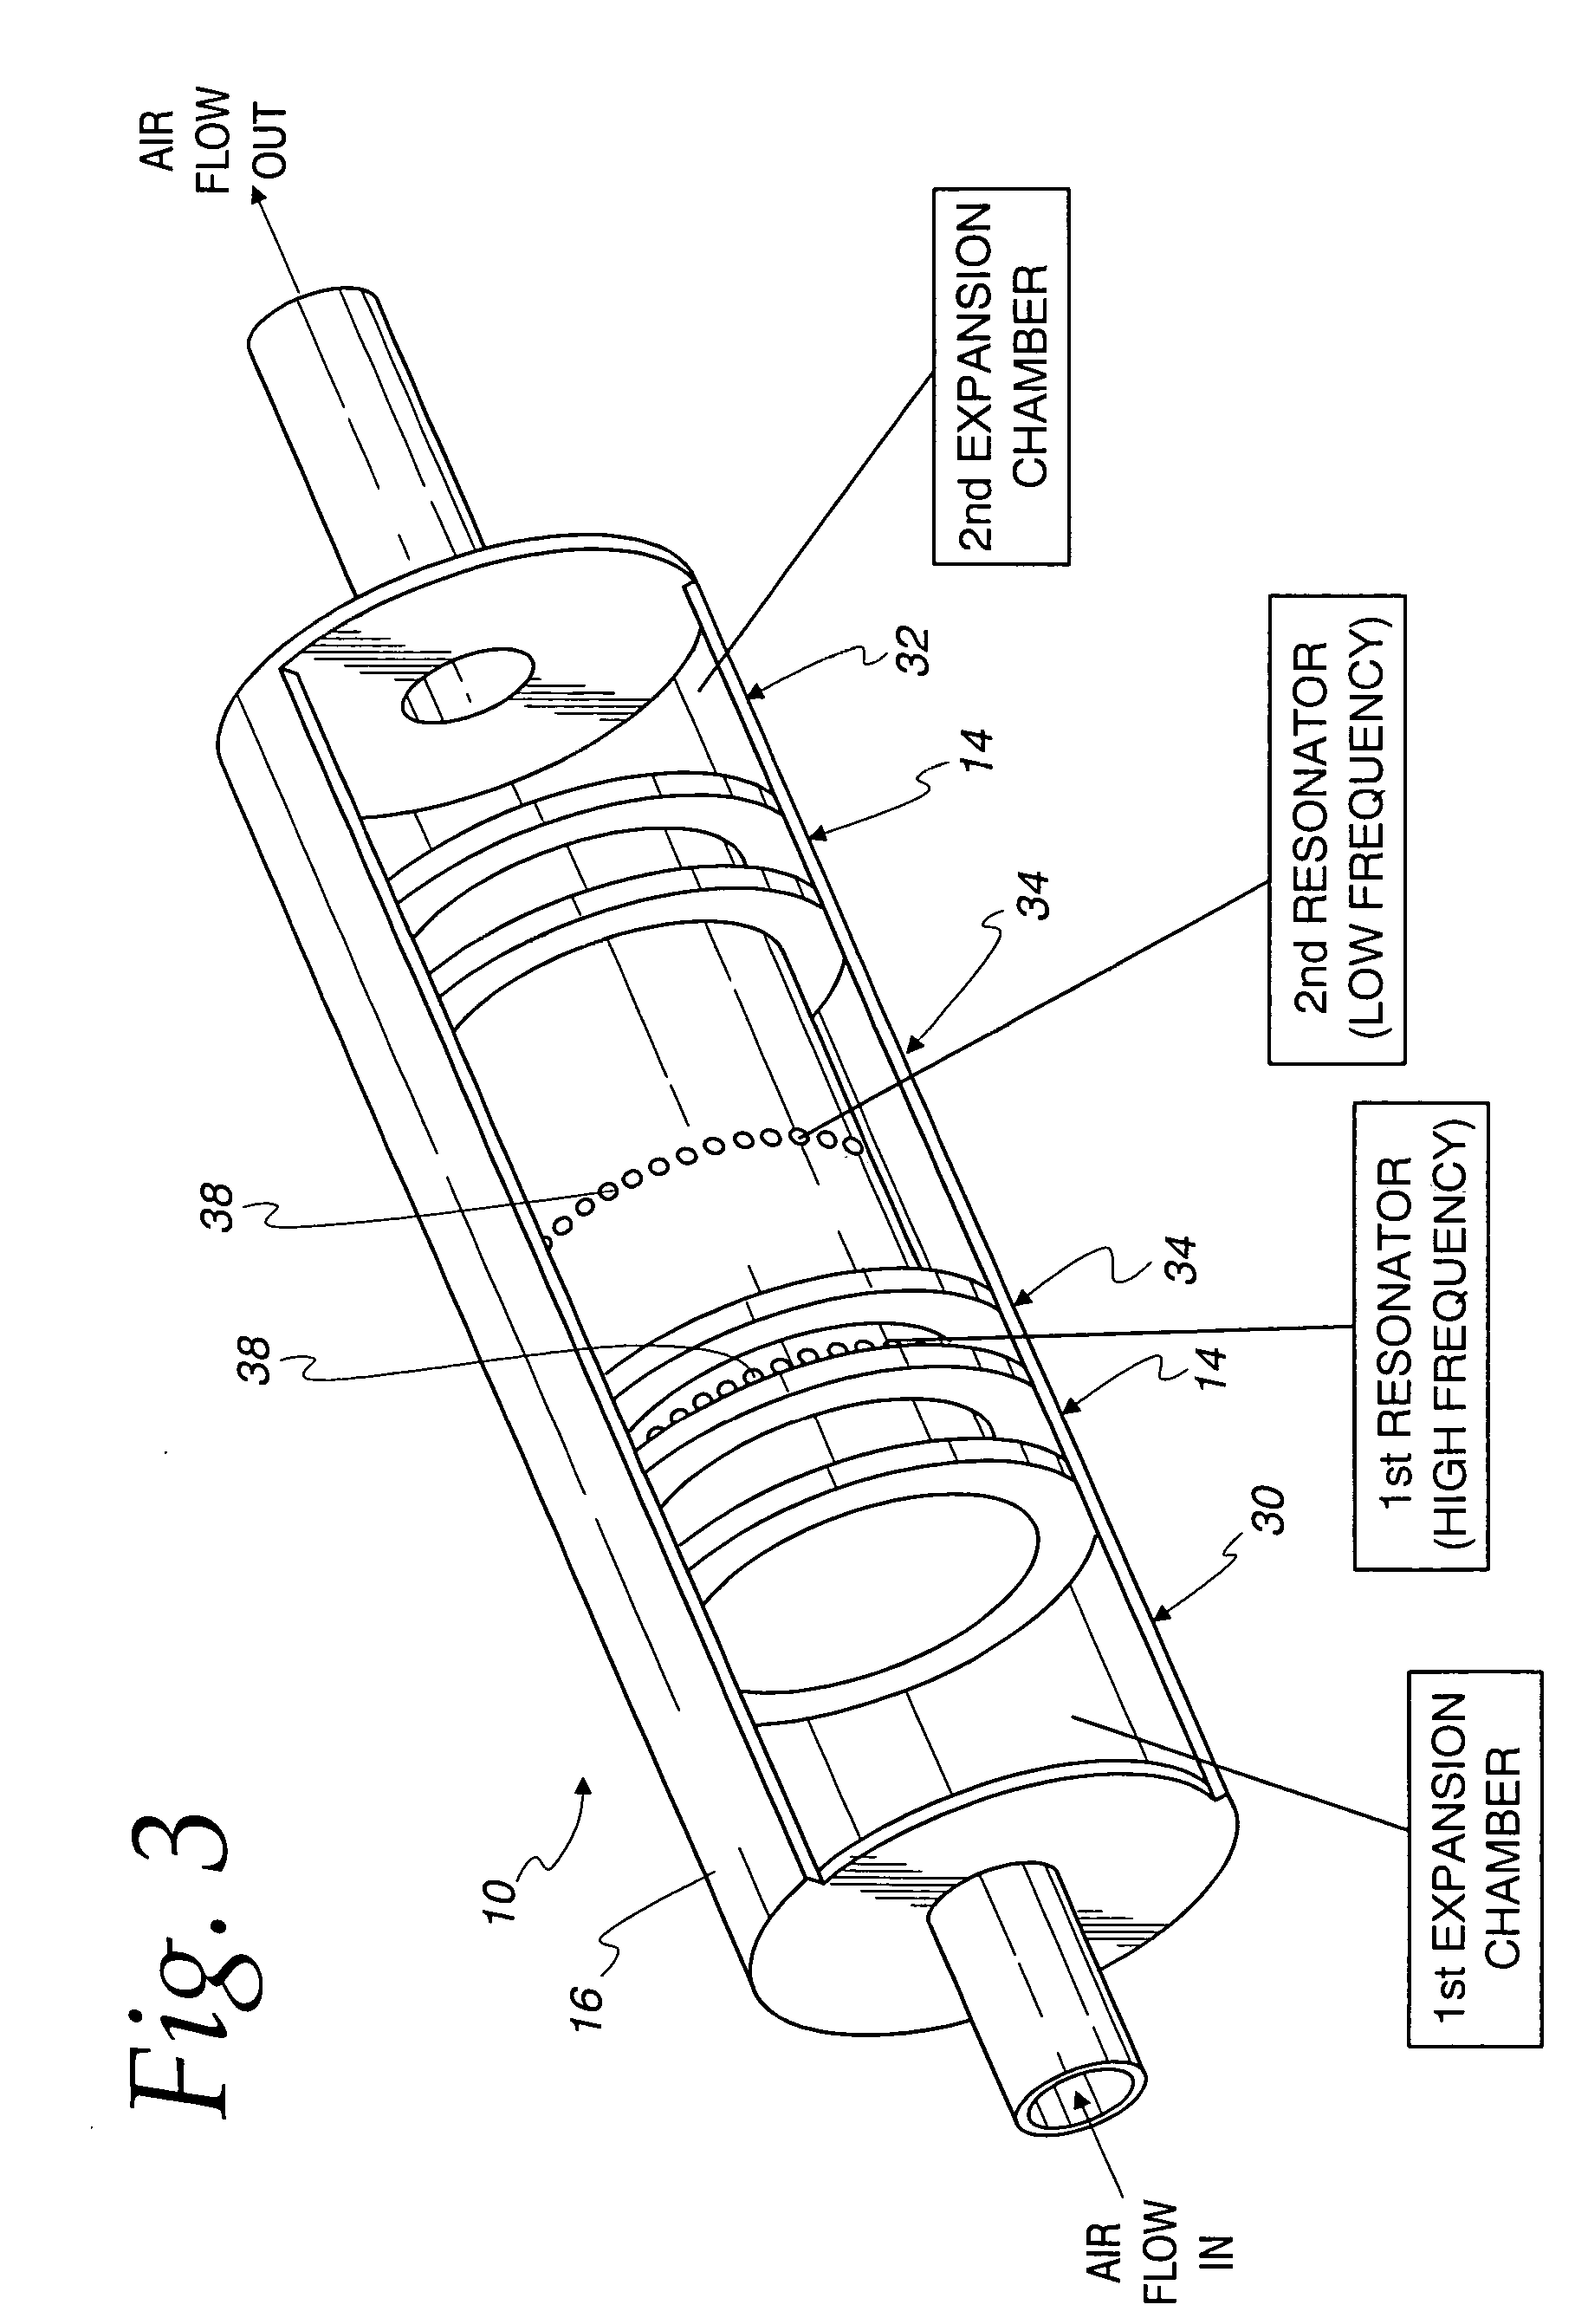 Integrated heat exchanger and muffler unit